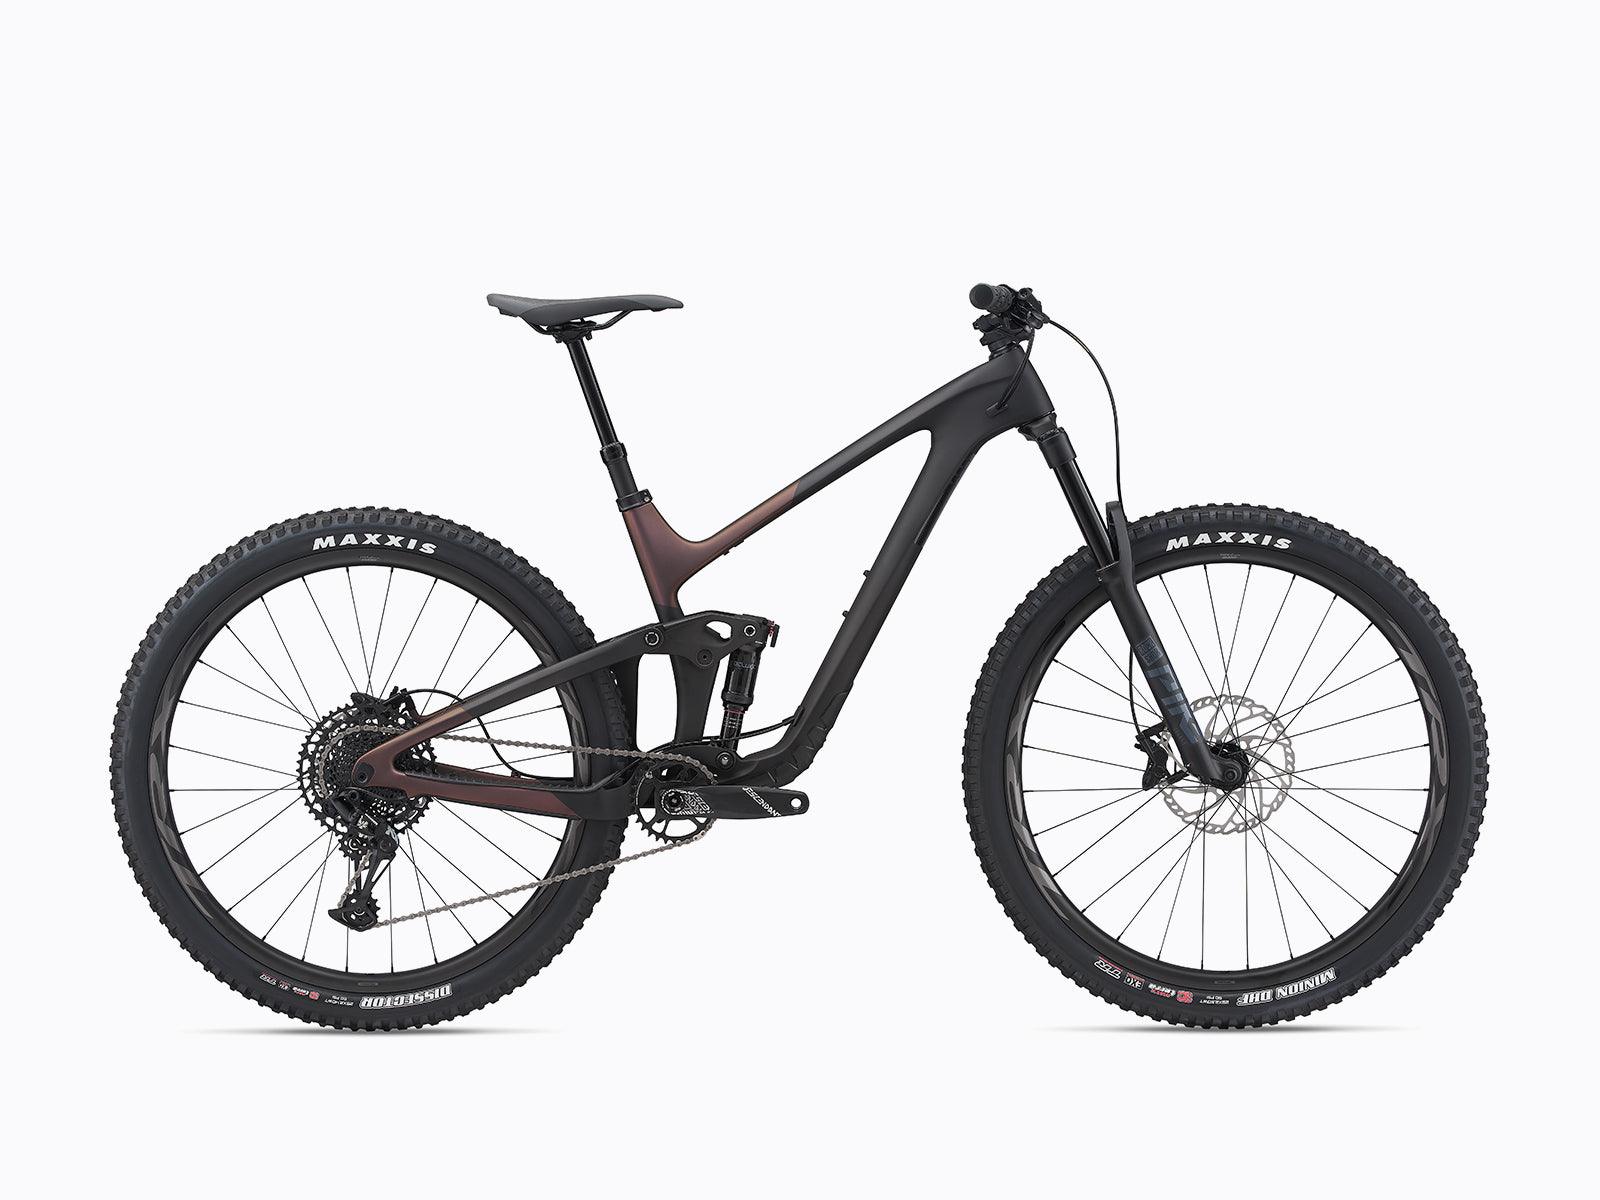 Image features a Giant Trance x advanced Pro 29 2, a mountain bike from giants trail bike collection